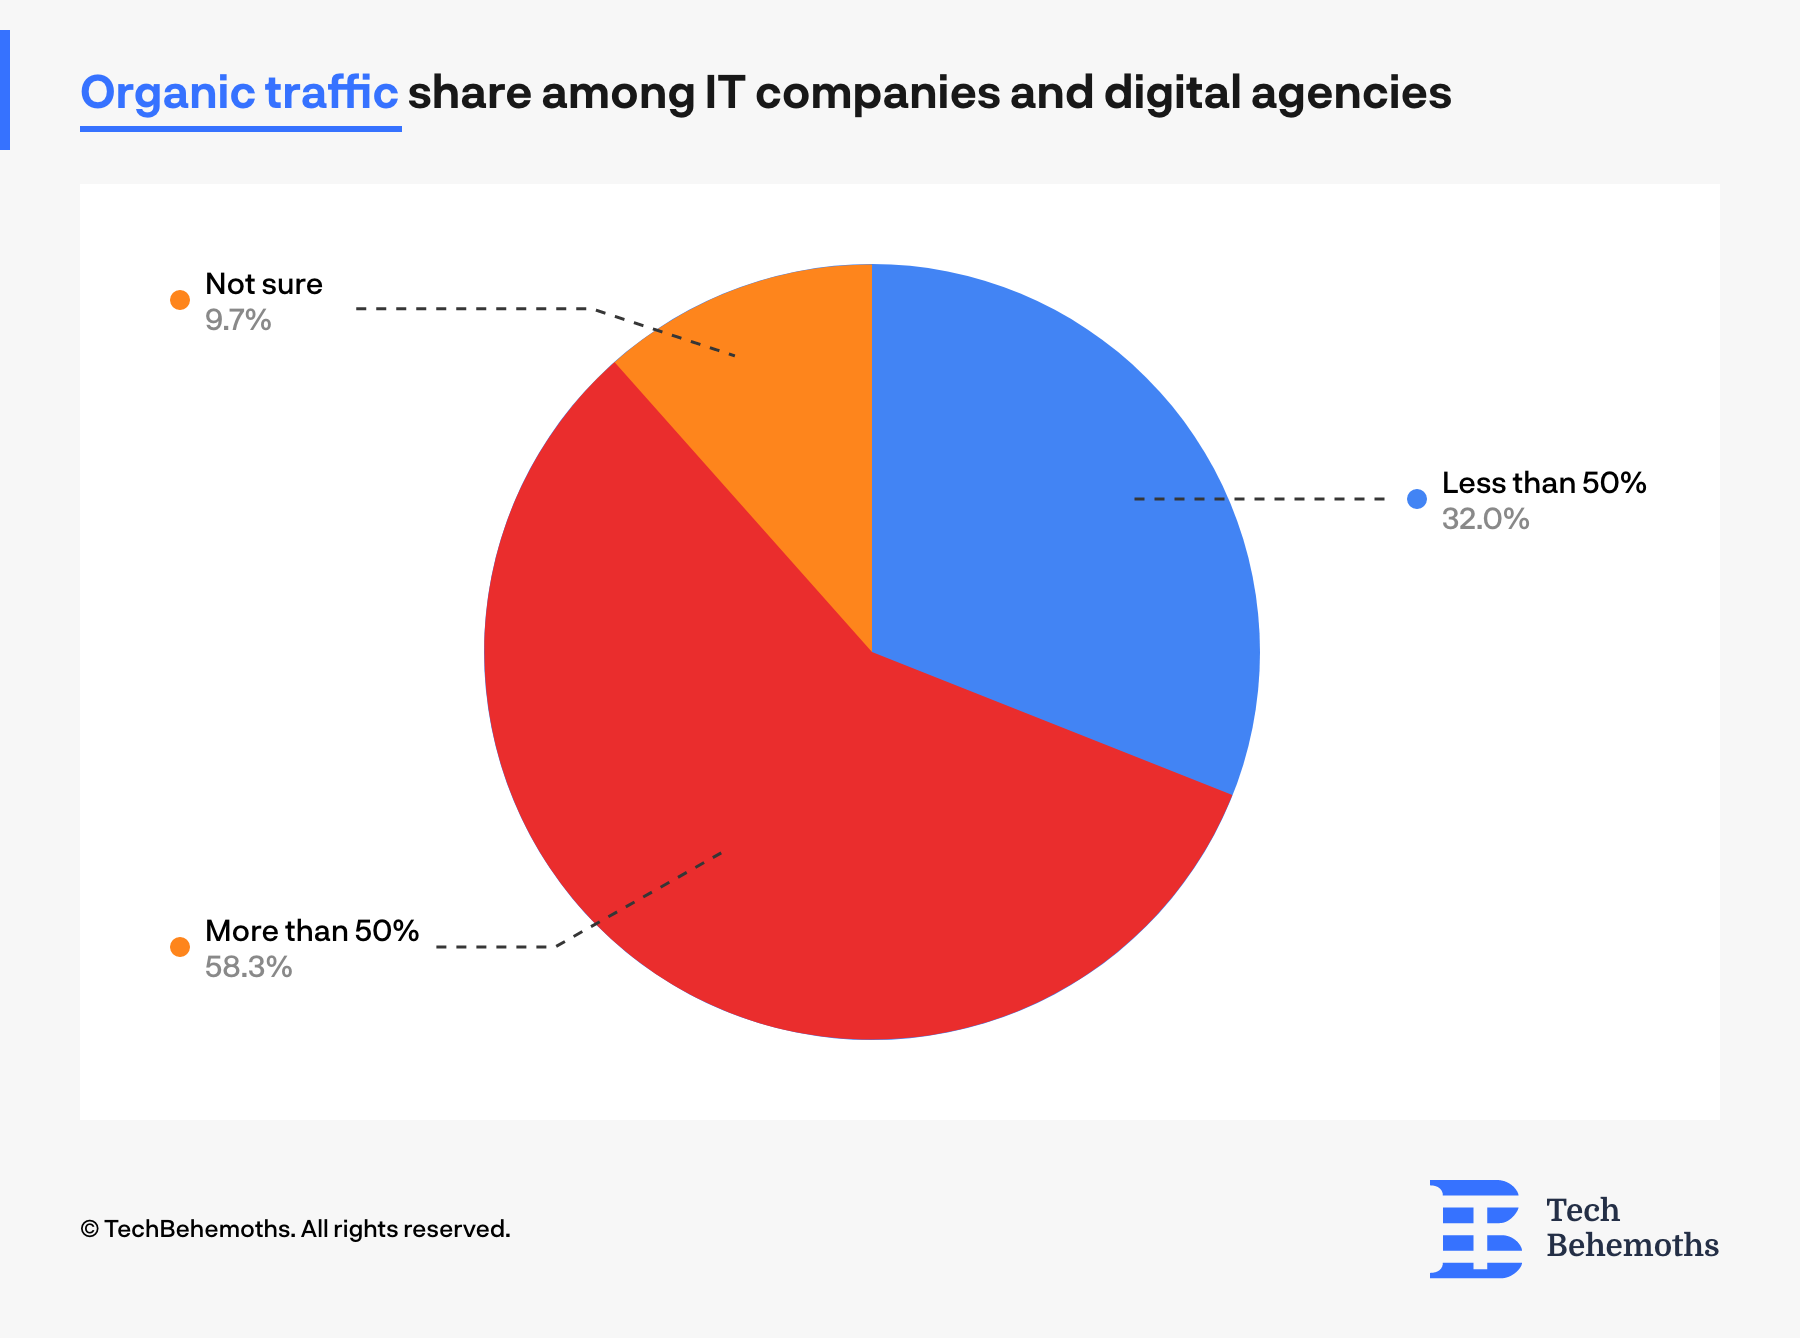 58% of it companies get more than a half of their traffic from organic sources such as search engines